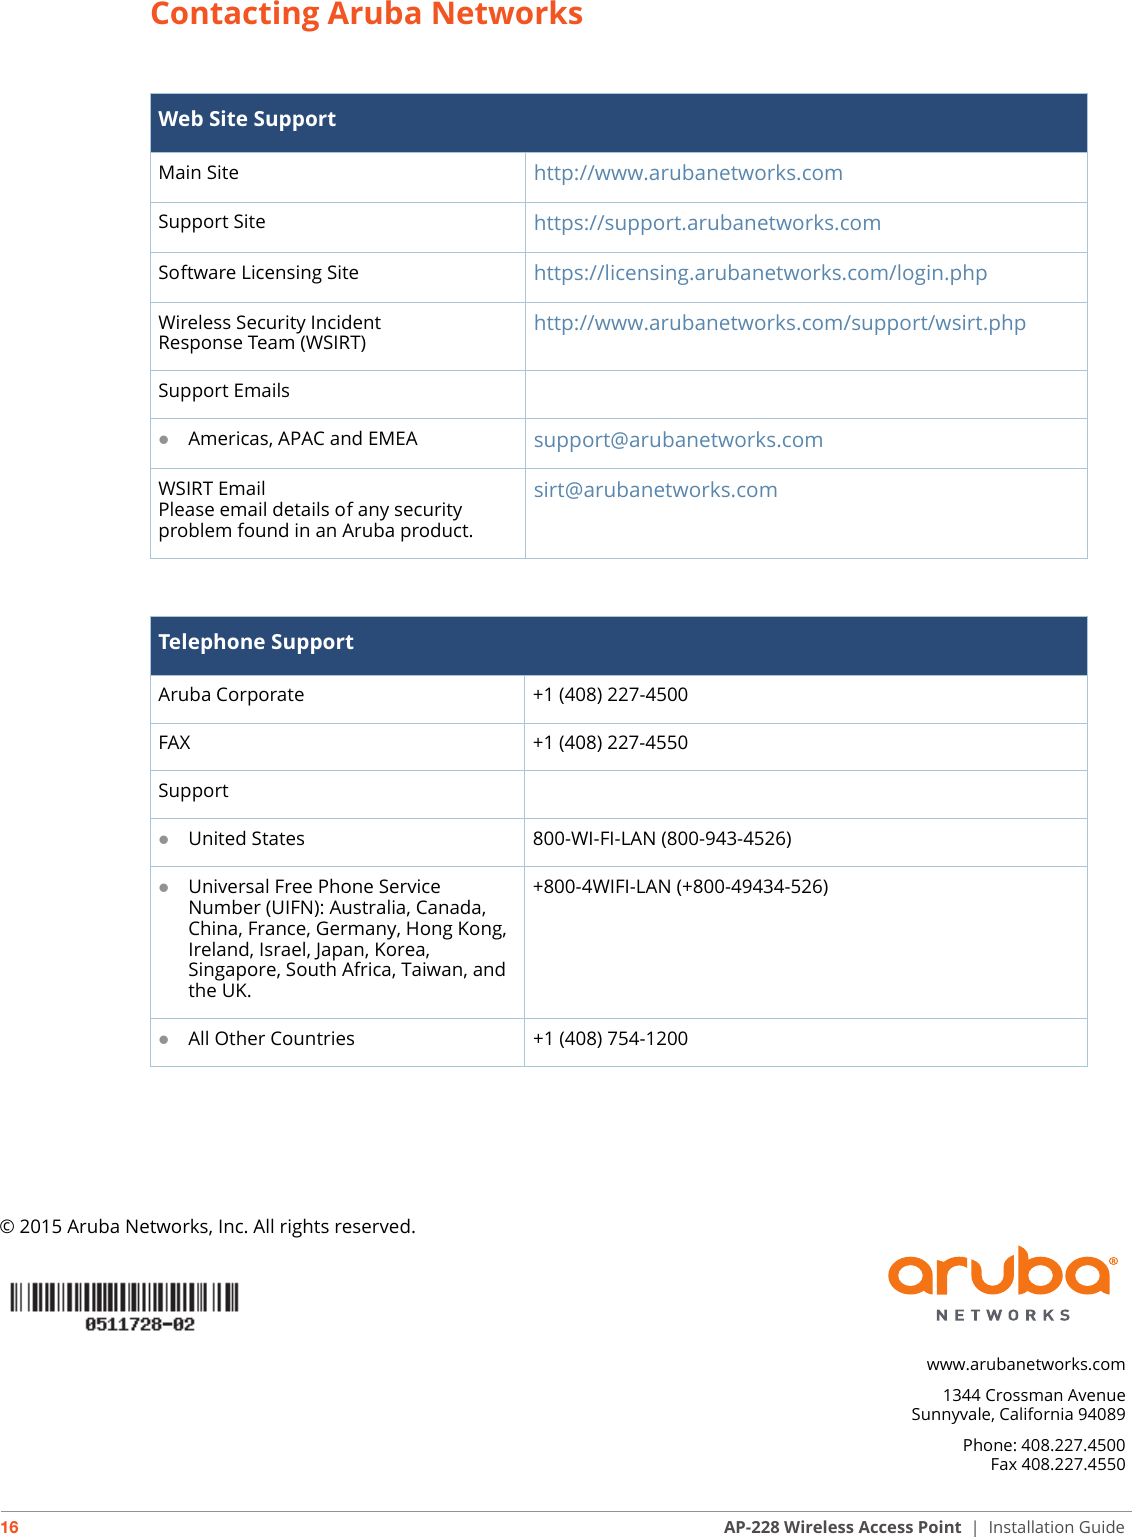 © 2015 Aruba Networks, Inc. All rights reserved.www.arubanetworks.com1344 Crossman AvenueSunnyvale, California 94089Phone: 408.227.4500Fax 408.227.455016 AP-228 Wireless Access Point | Installation GuideContacting Aruba NetworksWeb Site SupportMain Site http://www.arubanetworks.com Support Site https://support.arubanetworks.com Software Licensing Site https://licensing.arubanetworks.com/login.phpWireless Security IncidentResponse Team (WSIRT) http://www.arubanetworks.com/support/wsirt.phpSupport EmailsAmericas, APAC and EMEA support@arubanetworks.com WSIRT EmailPlease email details of any securityproblem found in an Aruba product.sirt@arubanetworks.comTelephone SupportAruba Corporate +1 (408) 227-4500FAX +1 (408) 227-4550SupportUnited States 800-WI-FI-LAN (800-943-4526)Universal Free Phone Service Number (UIFN): Australia, Canada, China, France, Germany, Hong Kong, Ireland, Israel, Japan, Korea, Singapore, South Africa, Taiwan, and the UK.+800-4WIFI-LAN (+800-49434-526)All Other Countries +1 (408) 754-1200